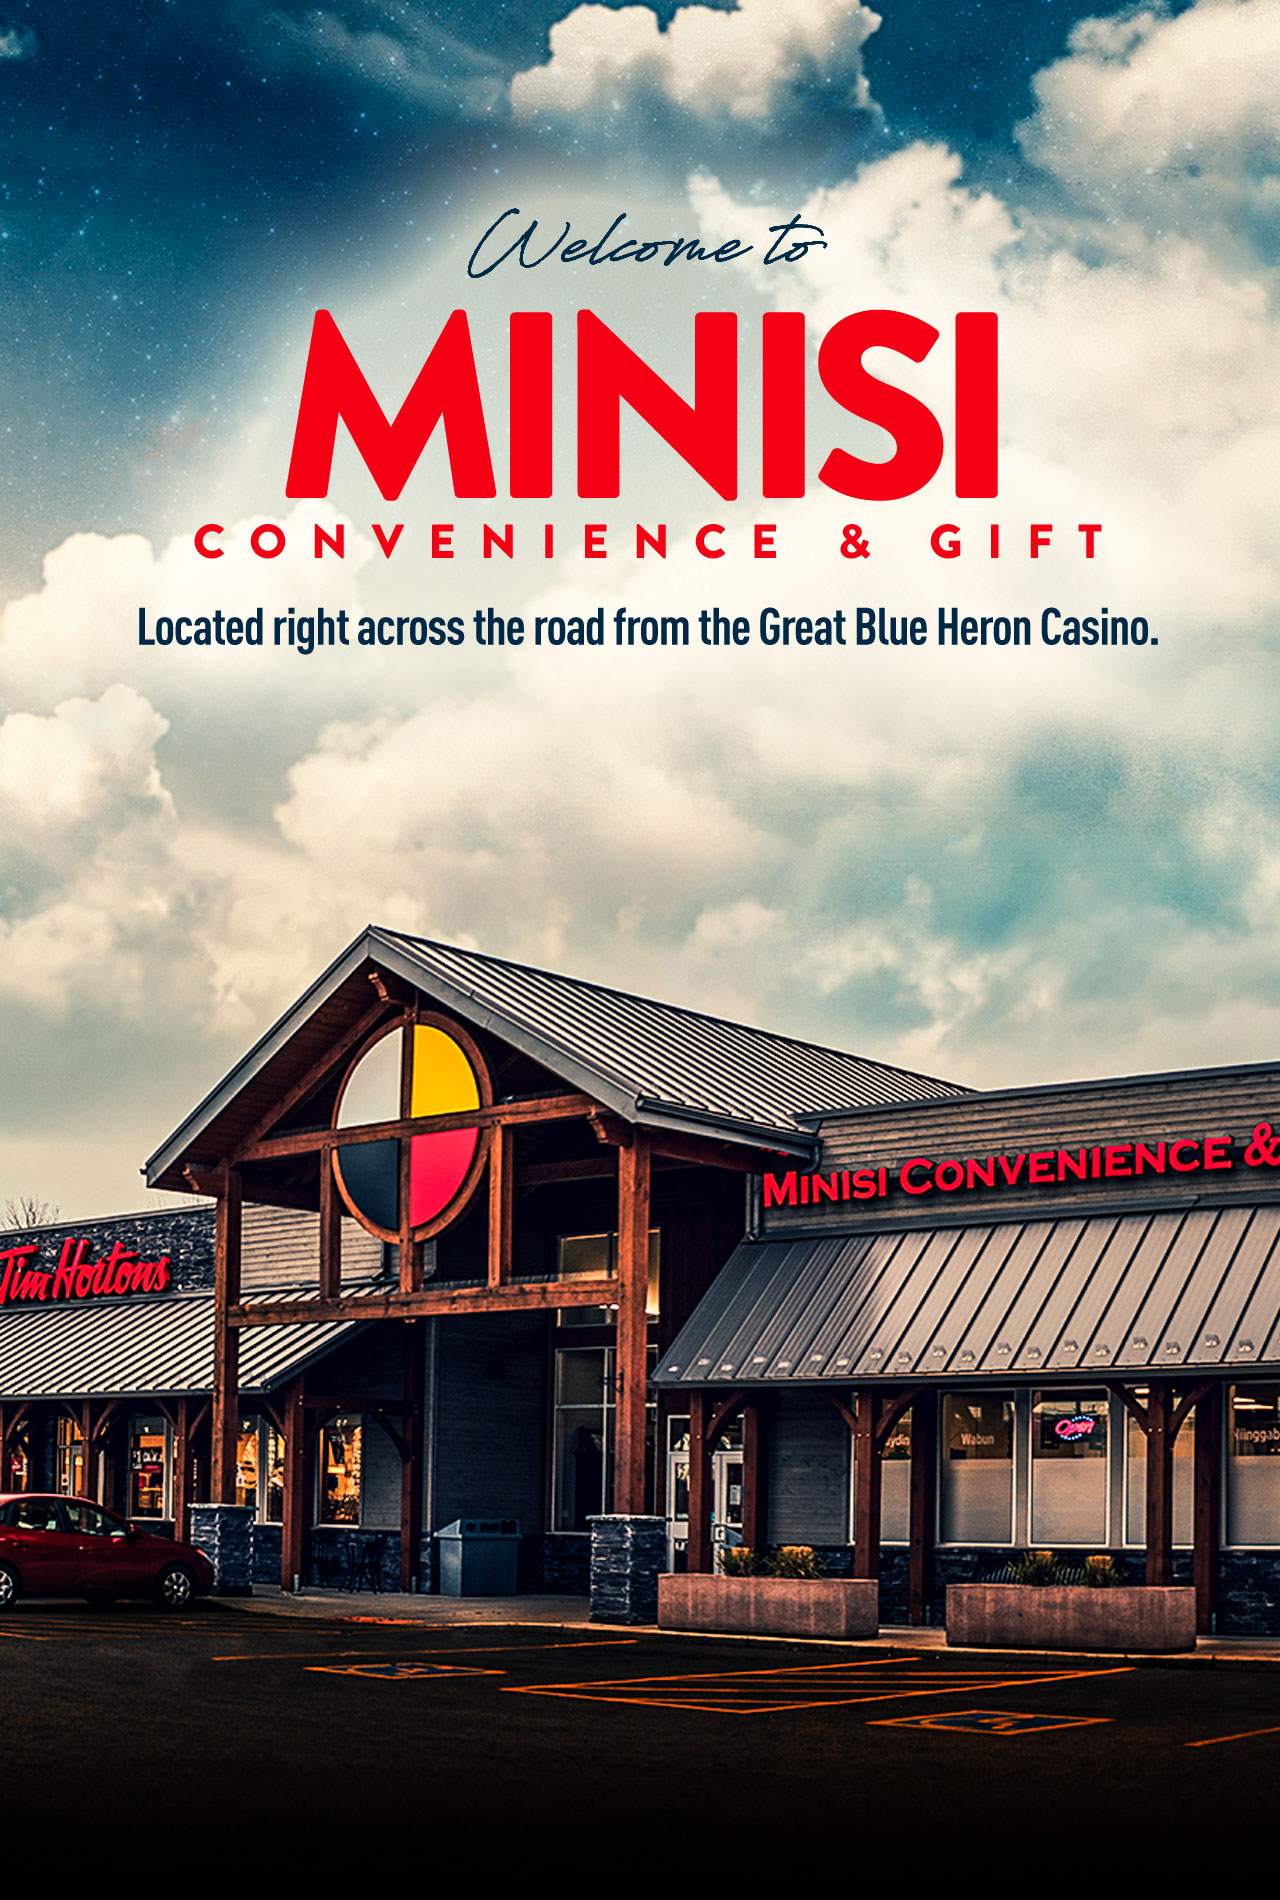 Welcome to Minisi Convenience & Gift